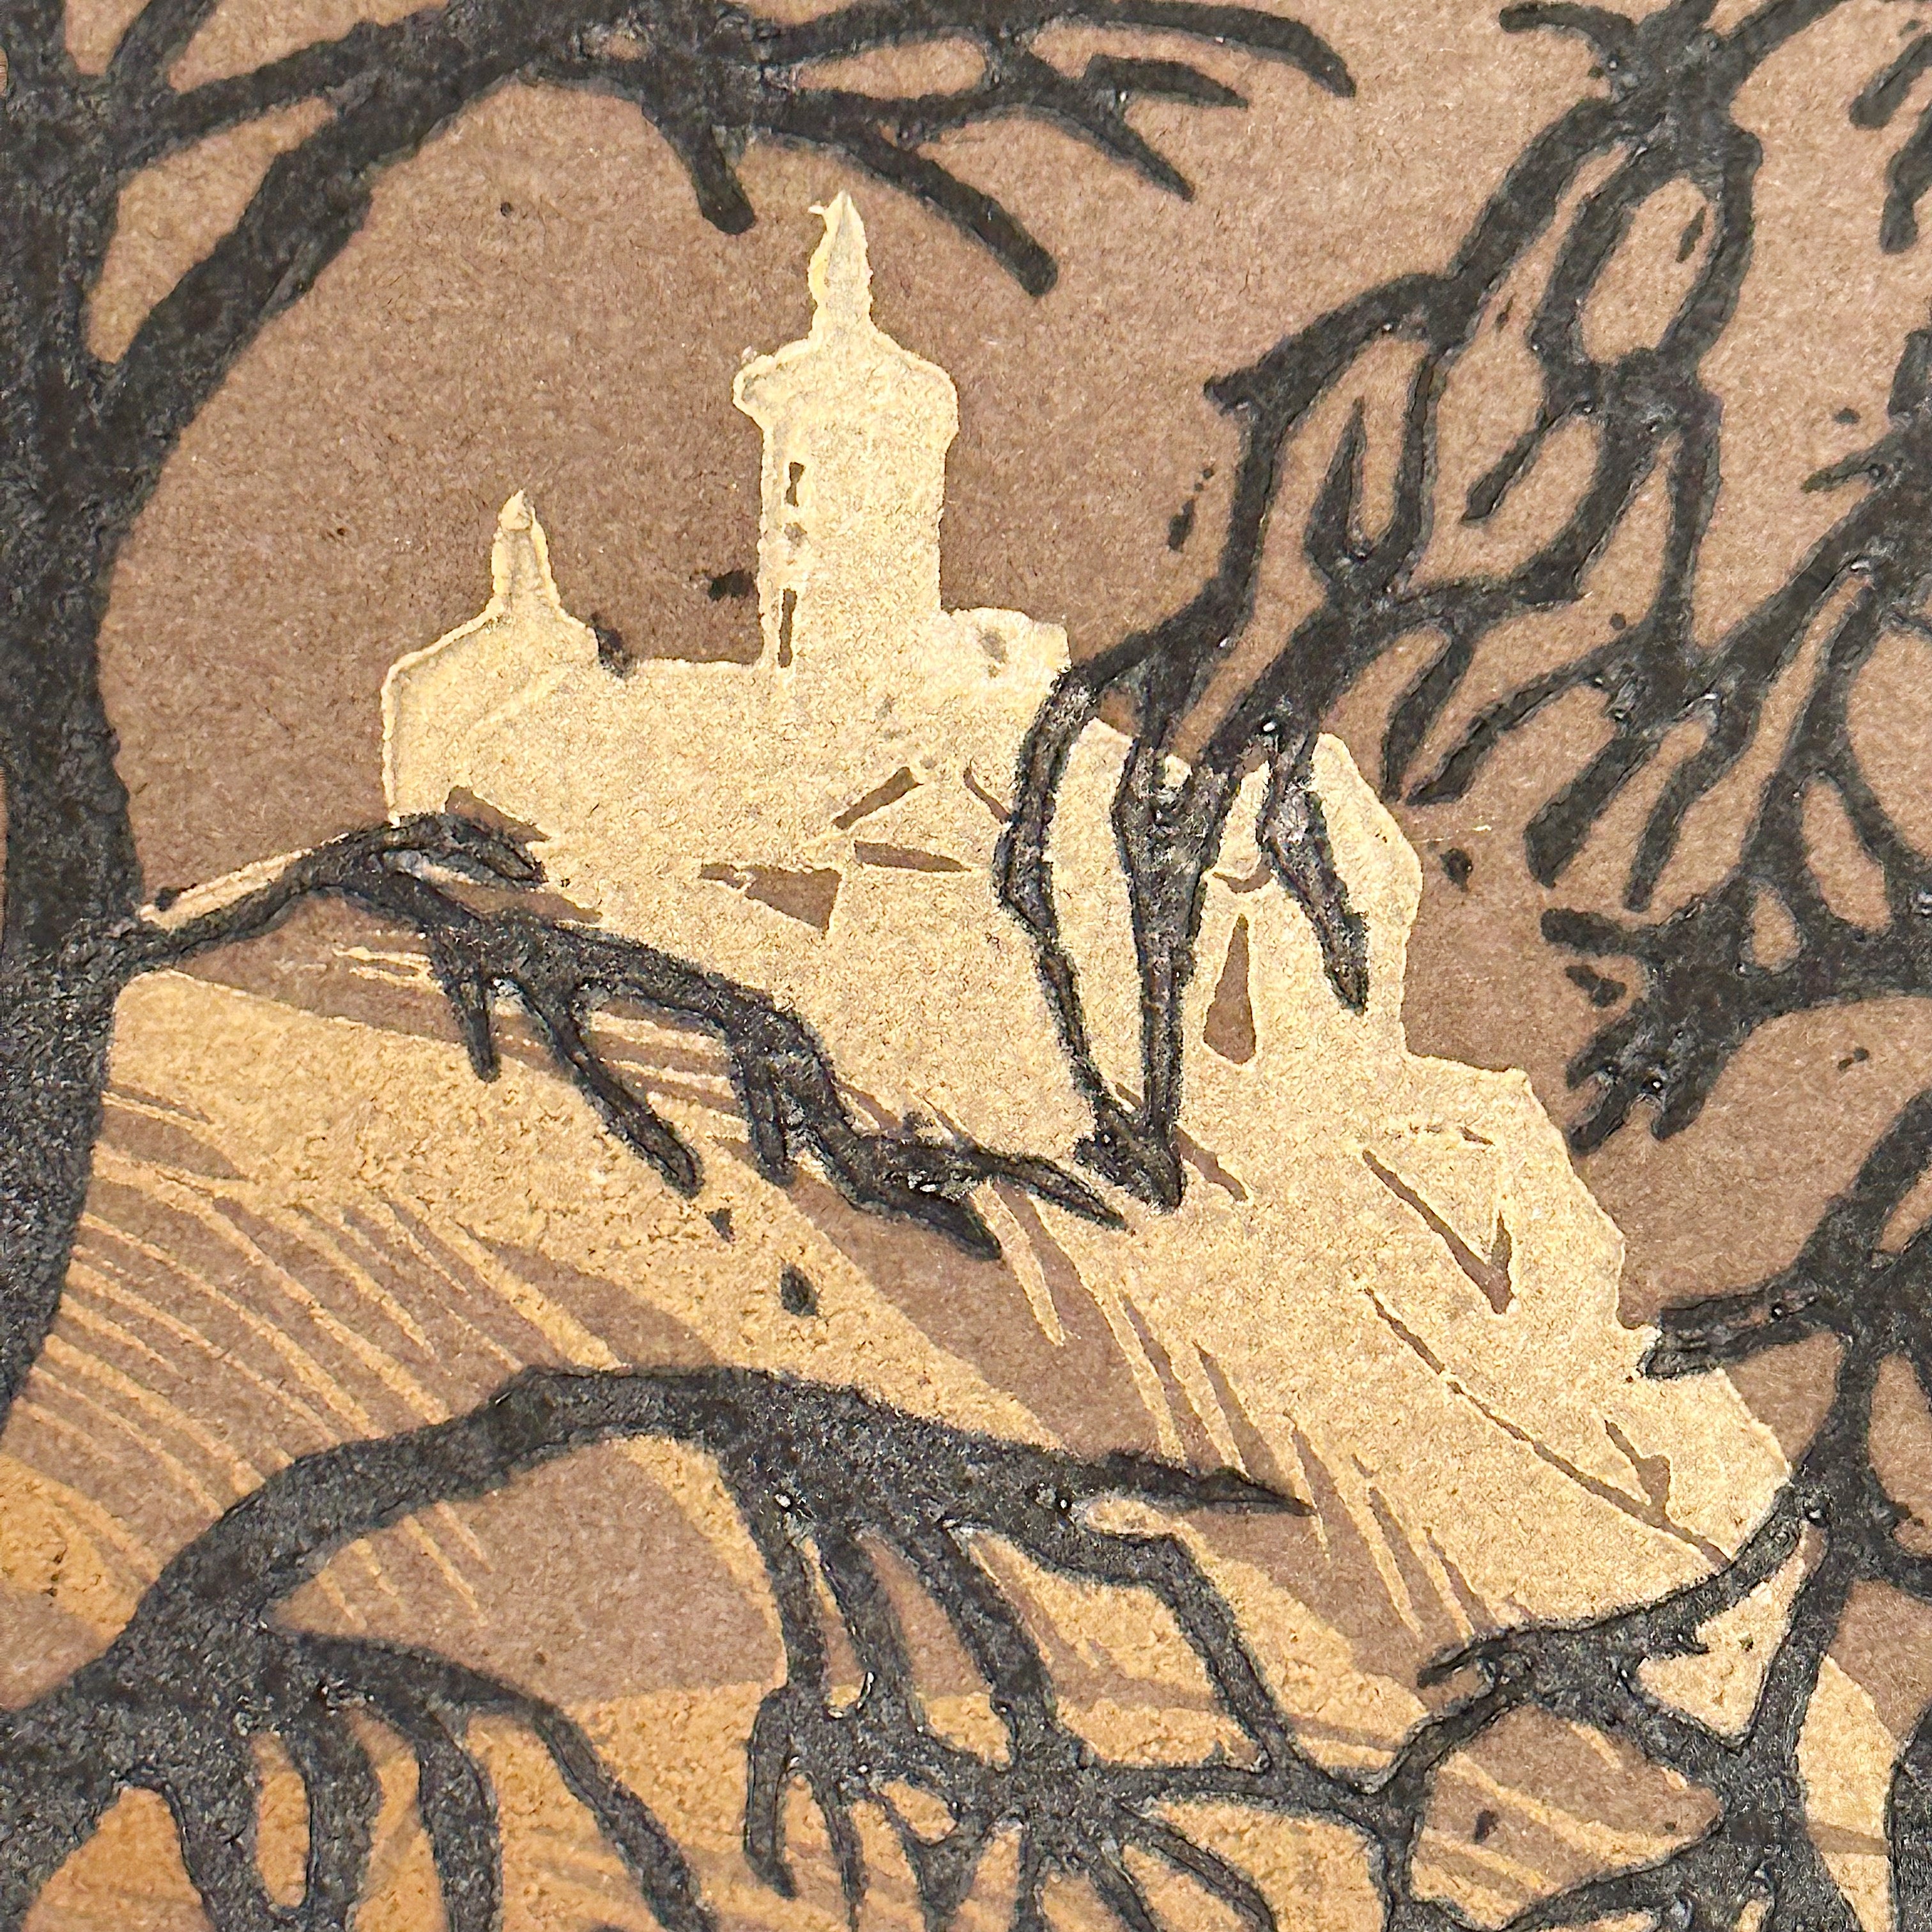 1920s Linocut Mixed Media Artwork of Castle in the Hills | California